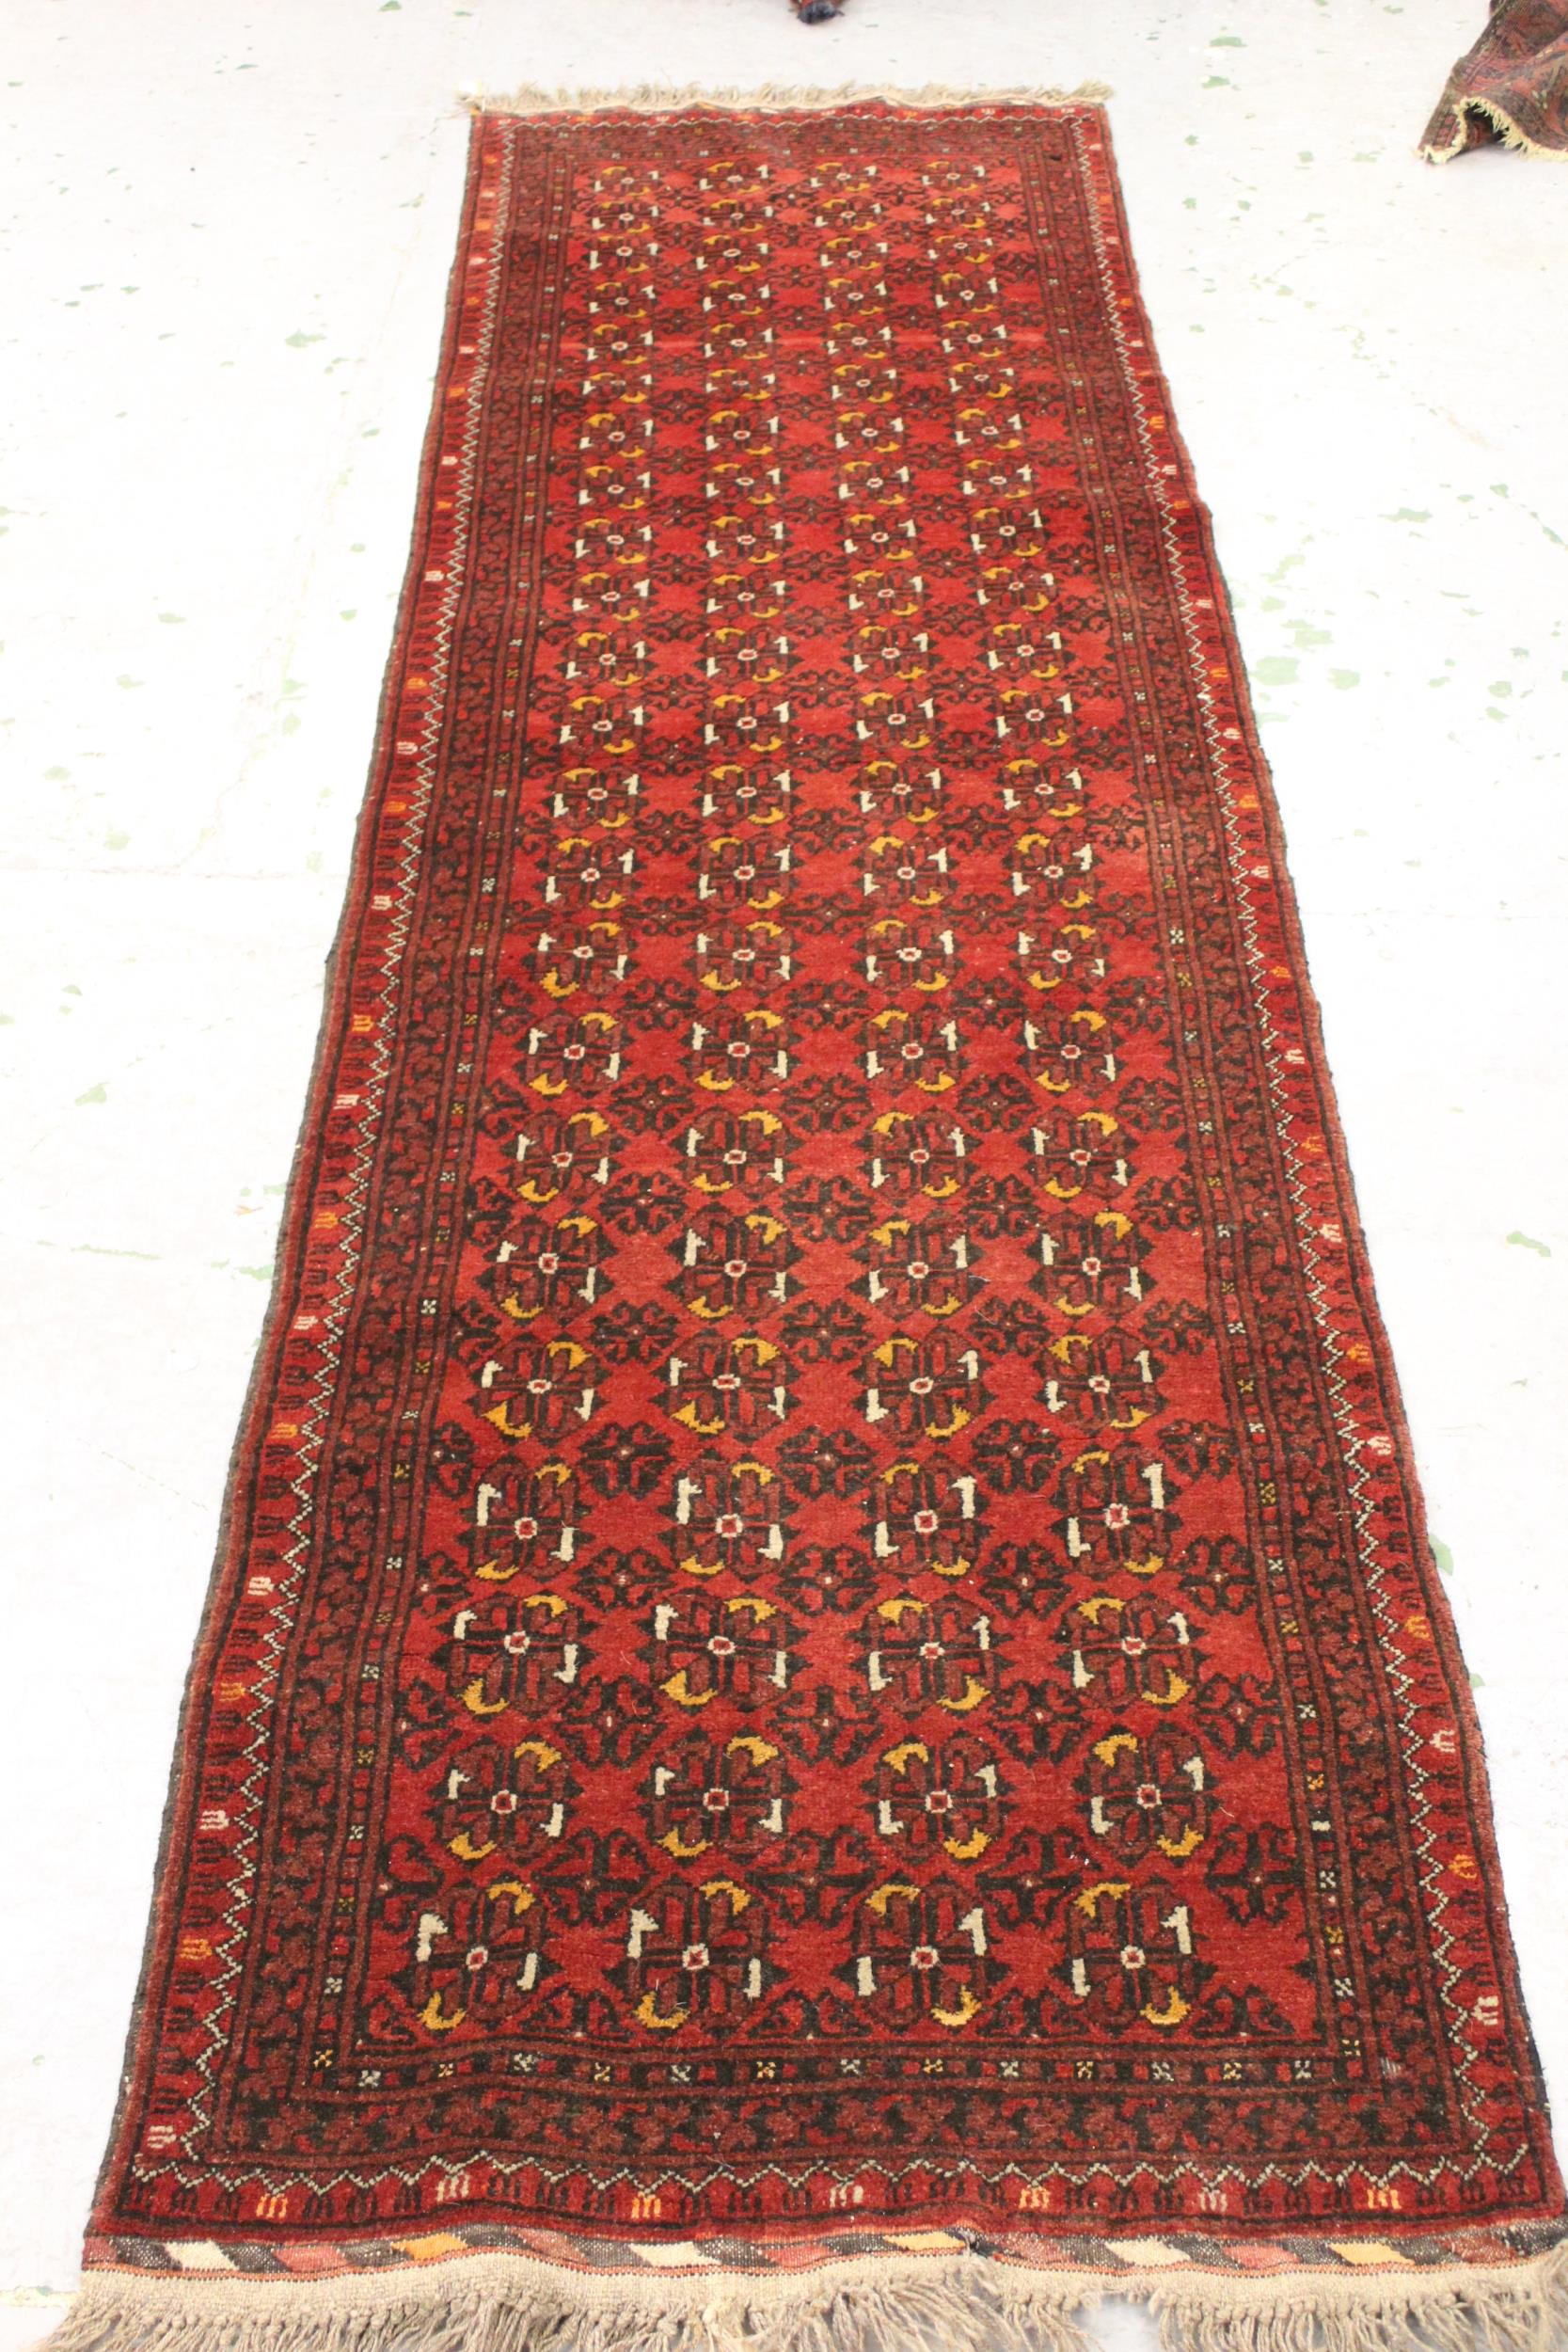 Afghan runner with four rows of gols, on a deep red ground with borders, 9ft 3ins x 2ft 8ins